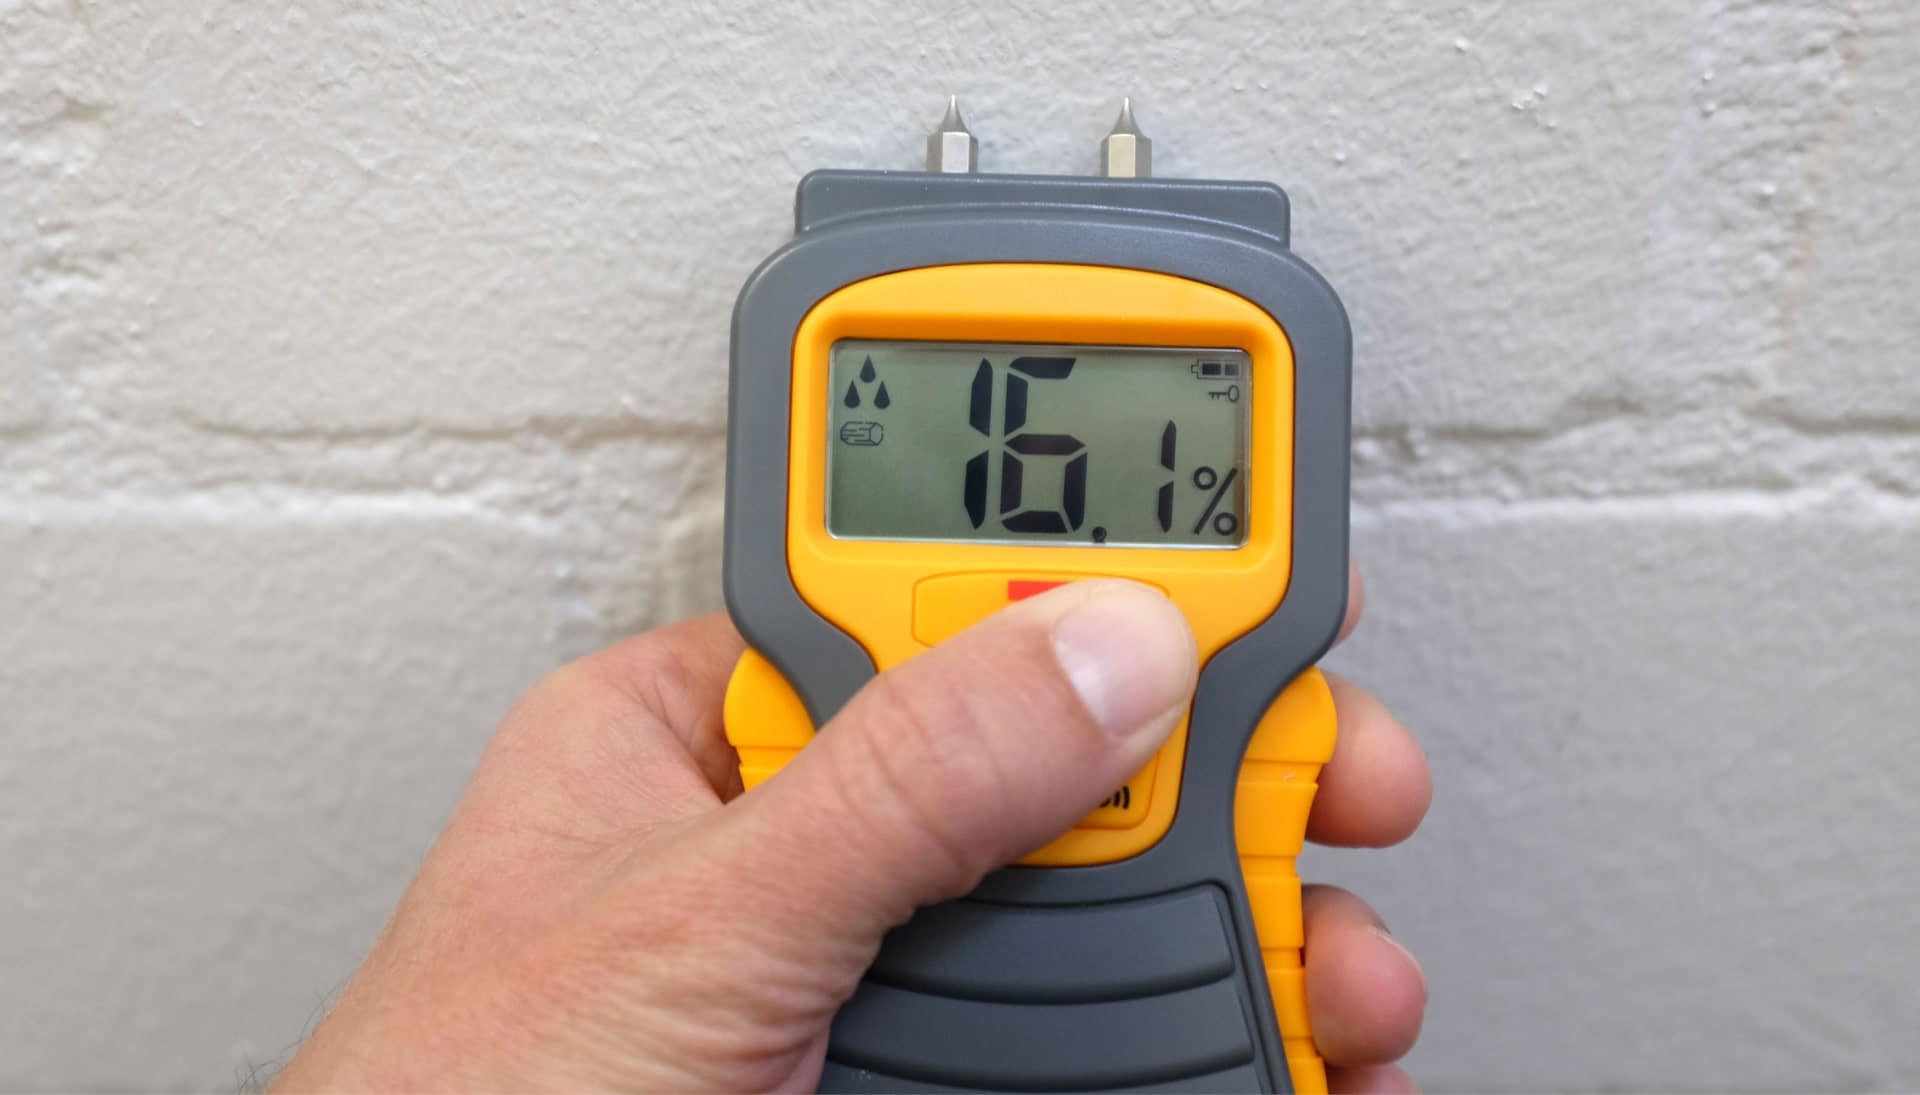 We provide fast, accurate, and affordable mold testing services in Kirby, Indiana.